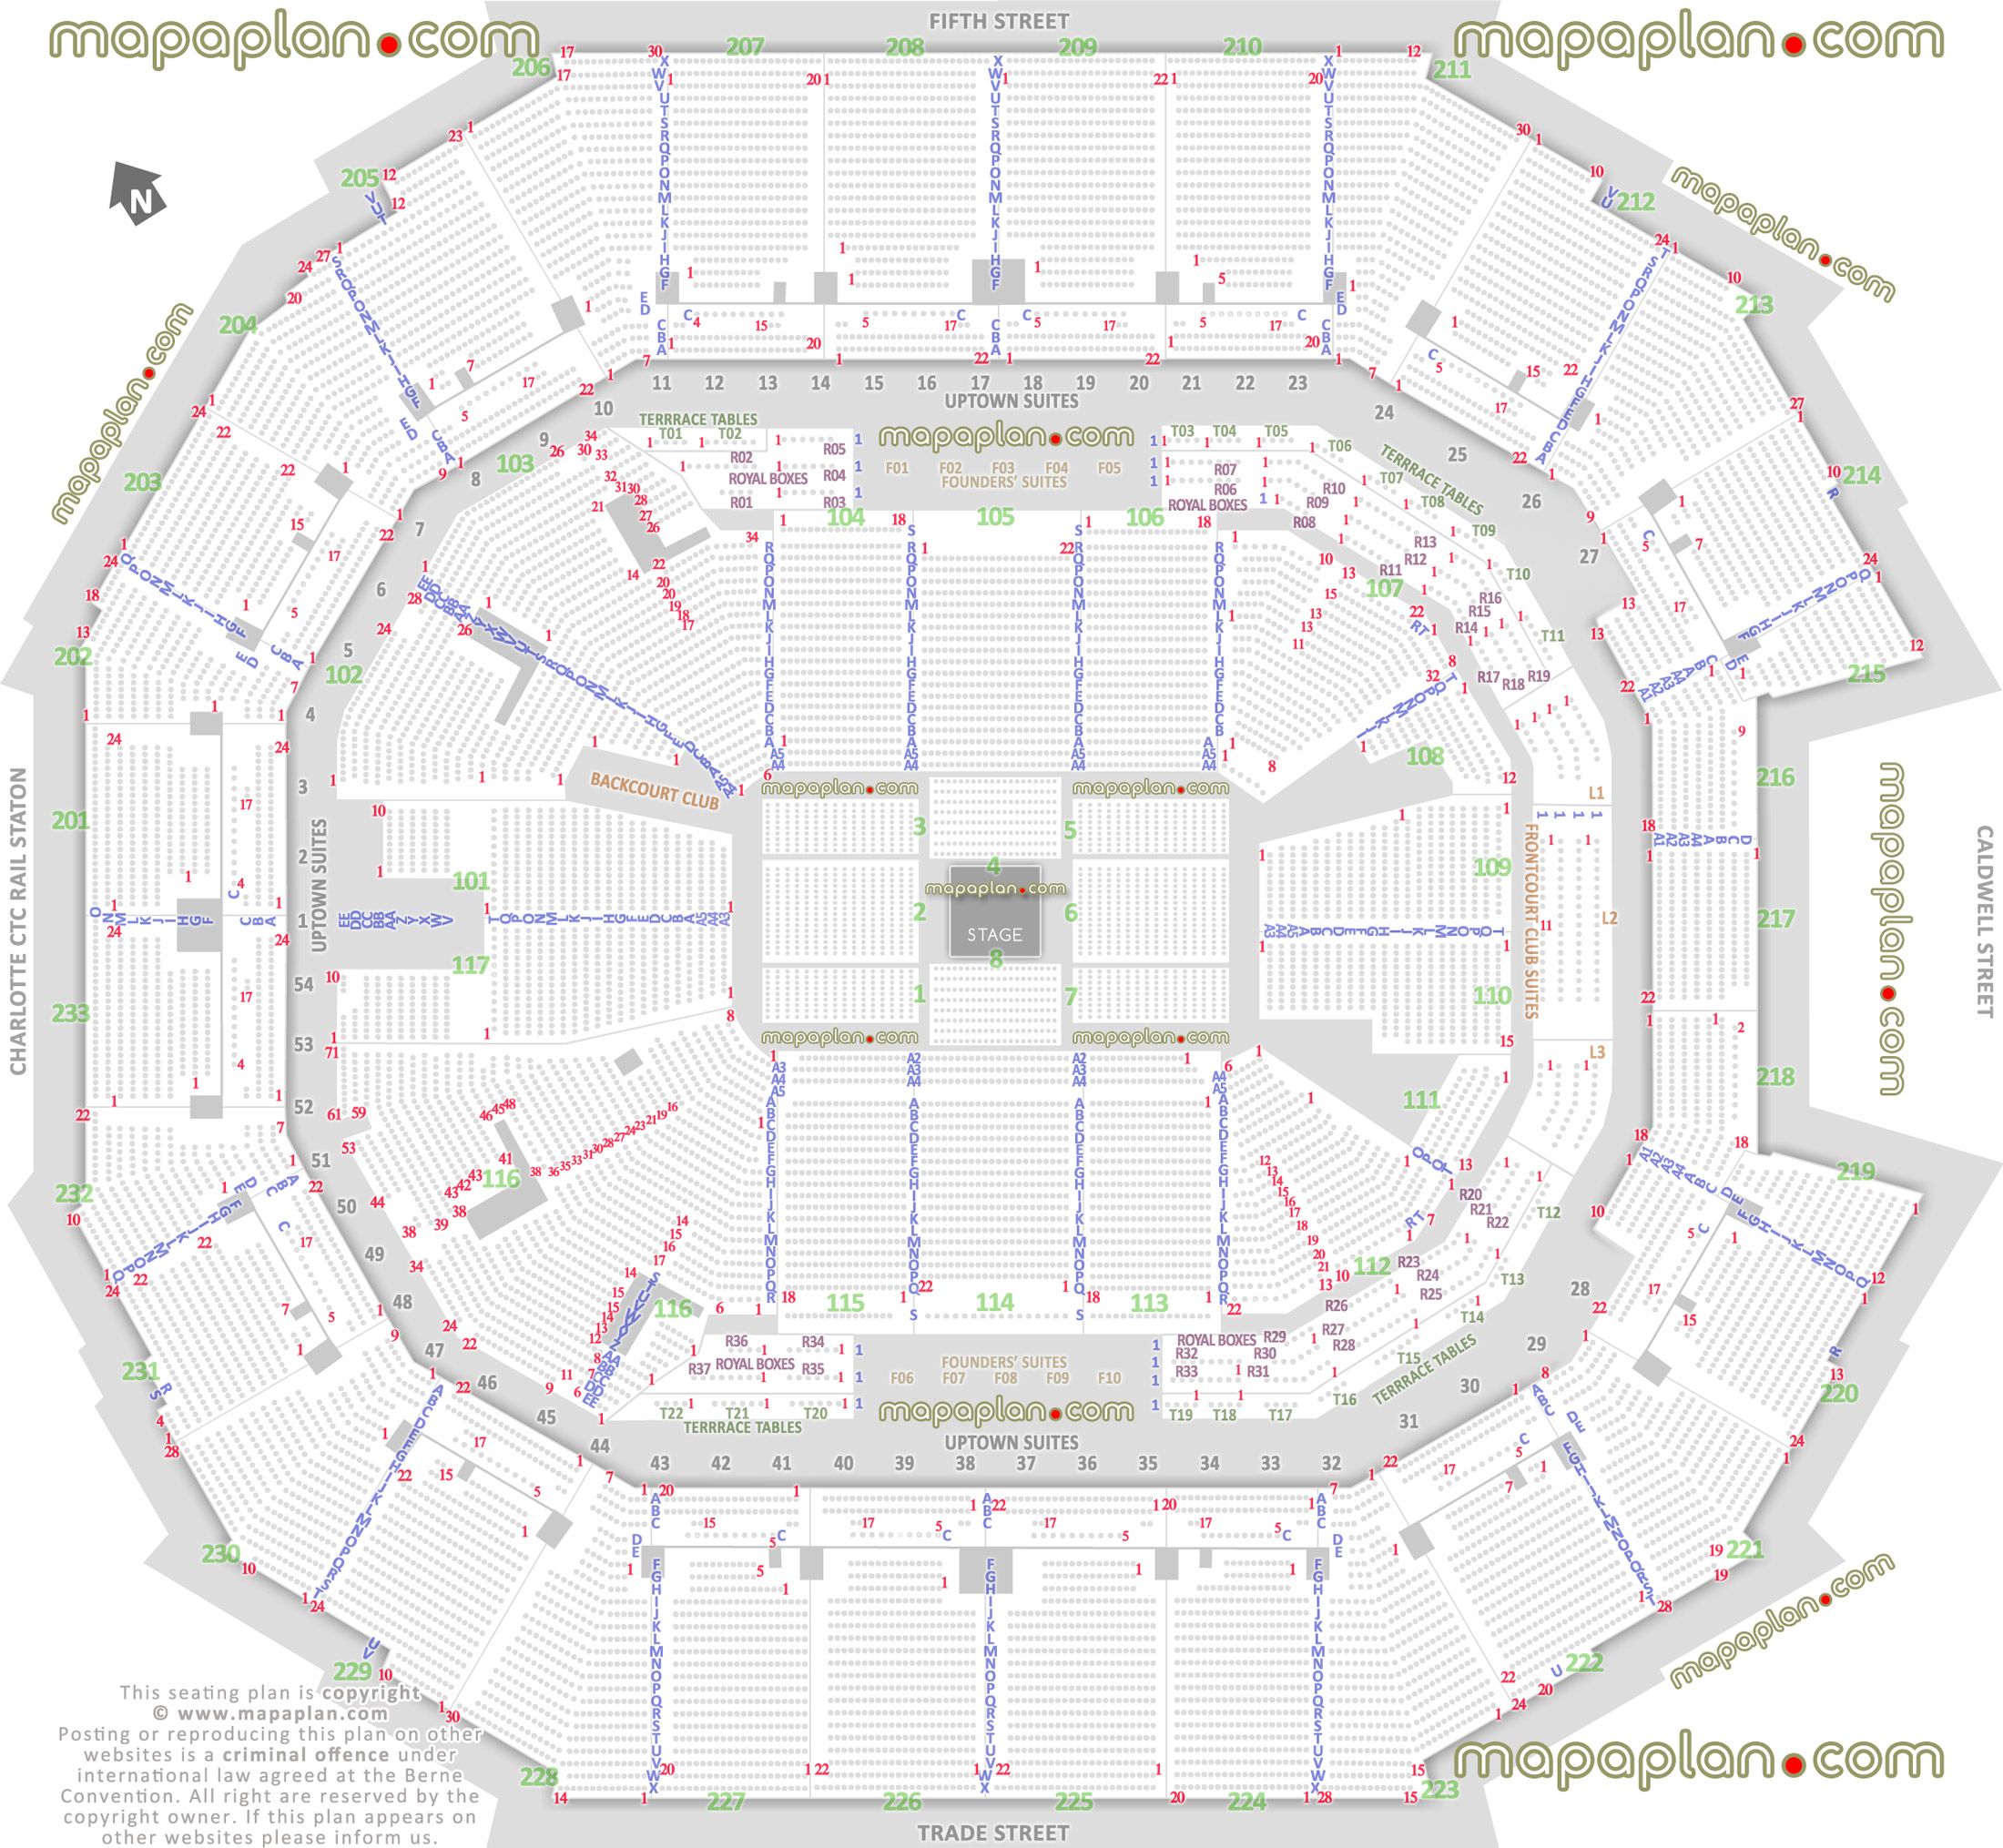 concert stage round printable virtual layout 360 degree arrangement diagram seats row lower upper sections frontcourt backcourt club uptown founders party suites lawn a1 a2 a3 a4 a5 a b c d e f g h i j k l m n o p q r s t u v w x y z aa bb cc dd ee Charlotte Time Warner Cable Arena seating chart